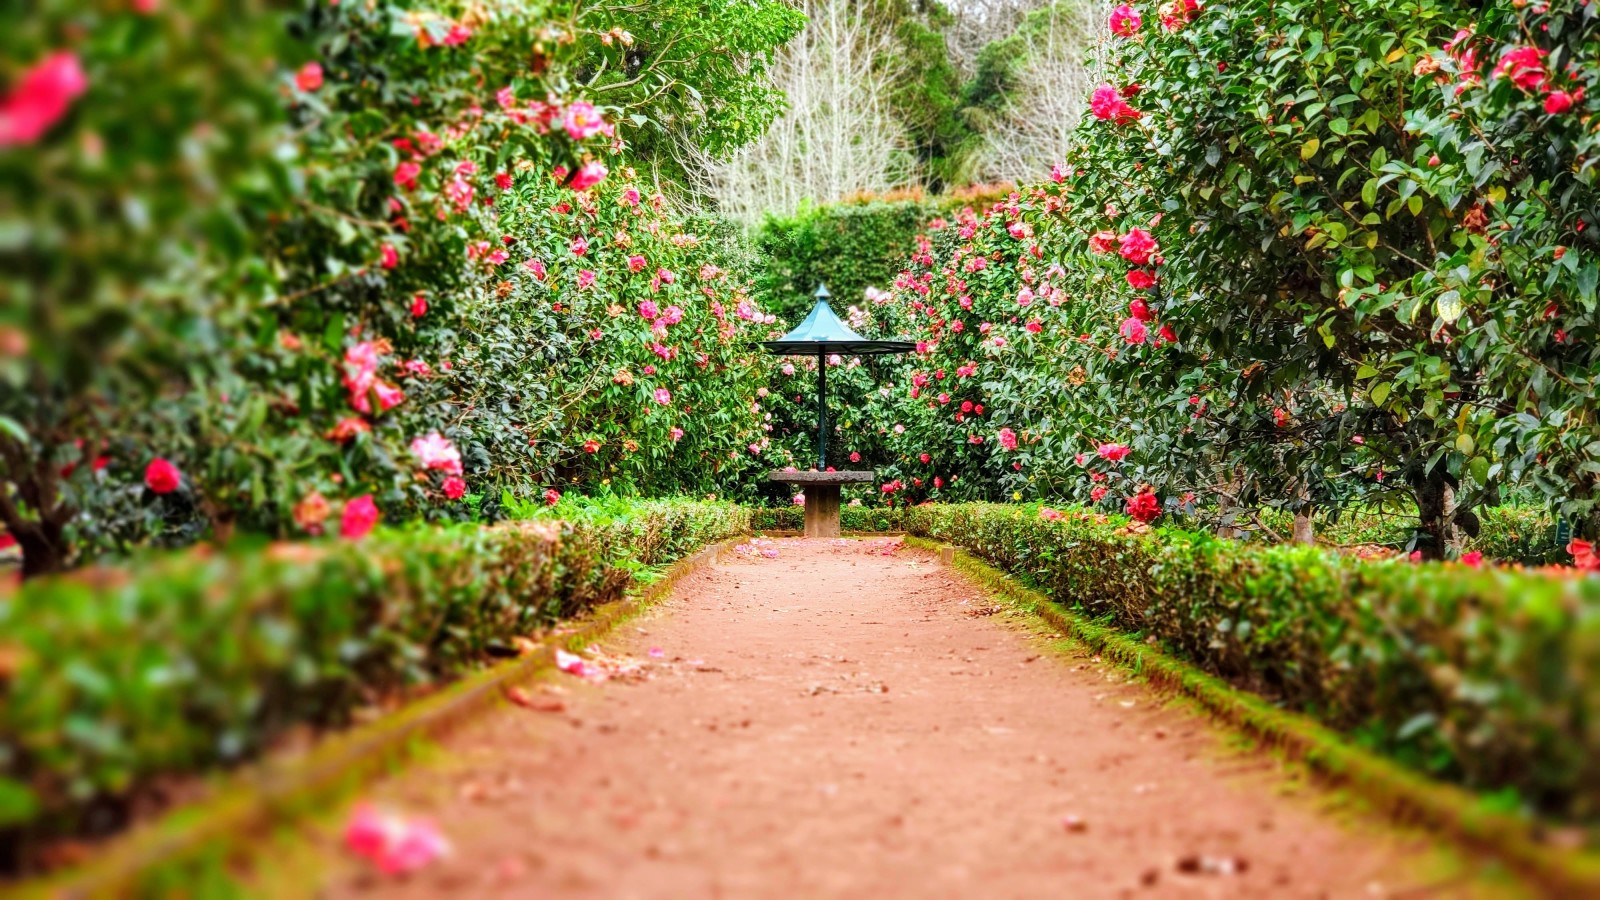 Dirt path surrounded by green foliage and pink flowers